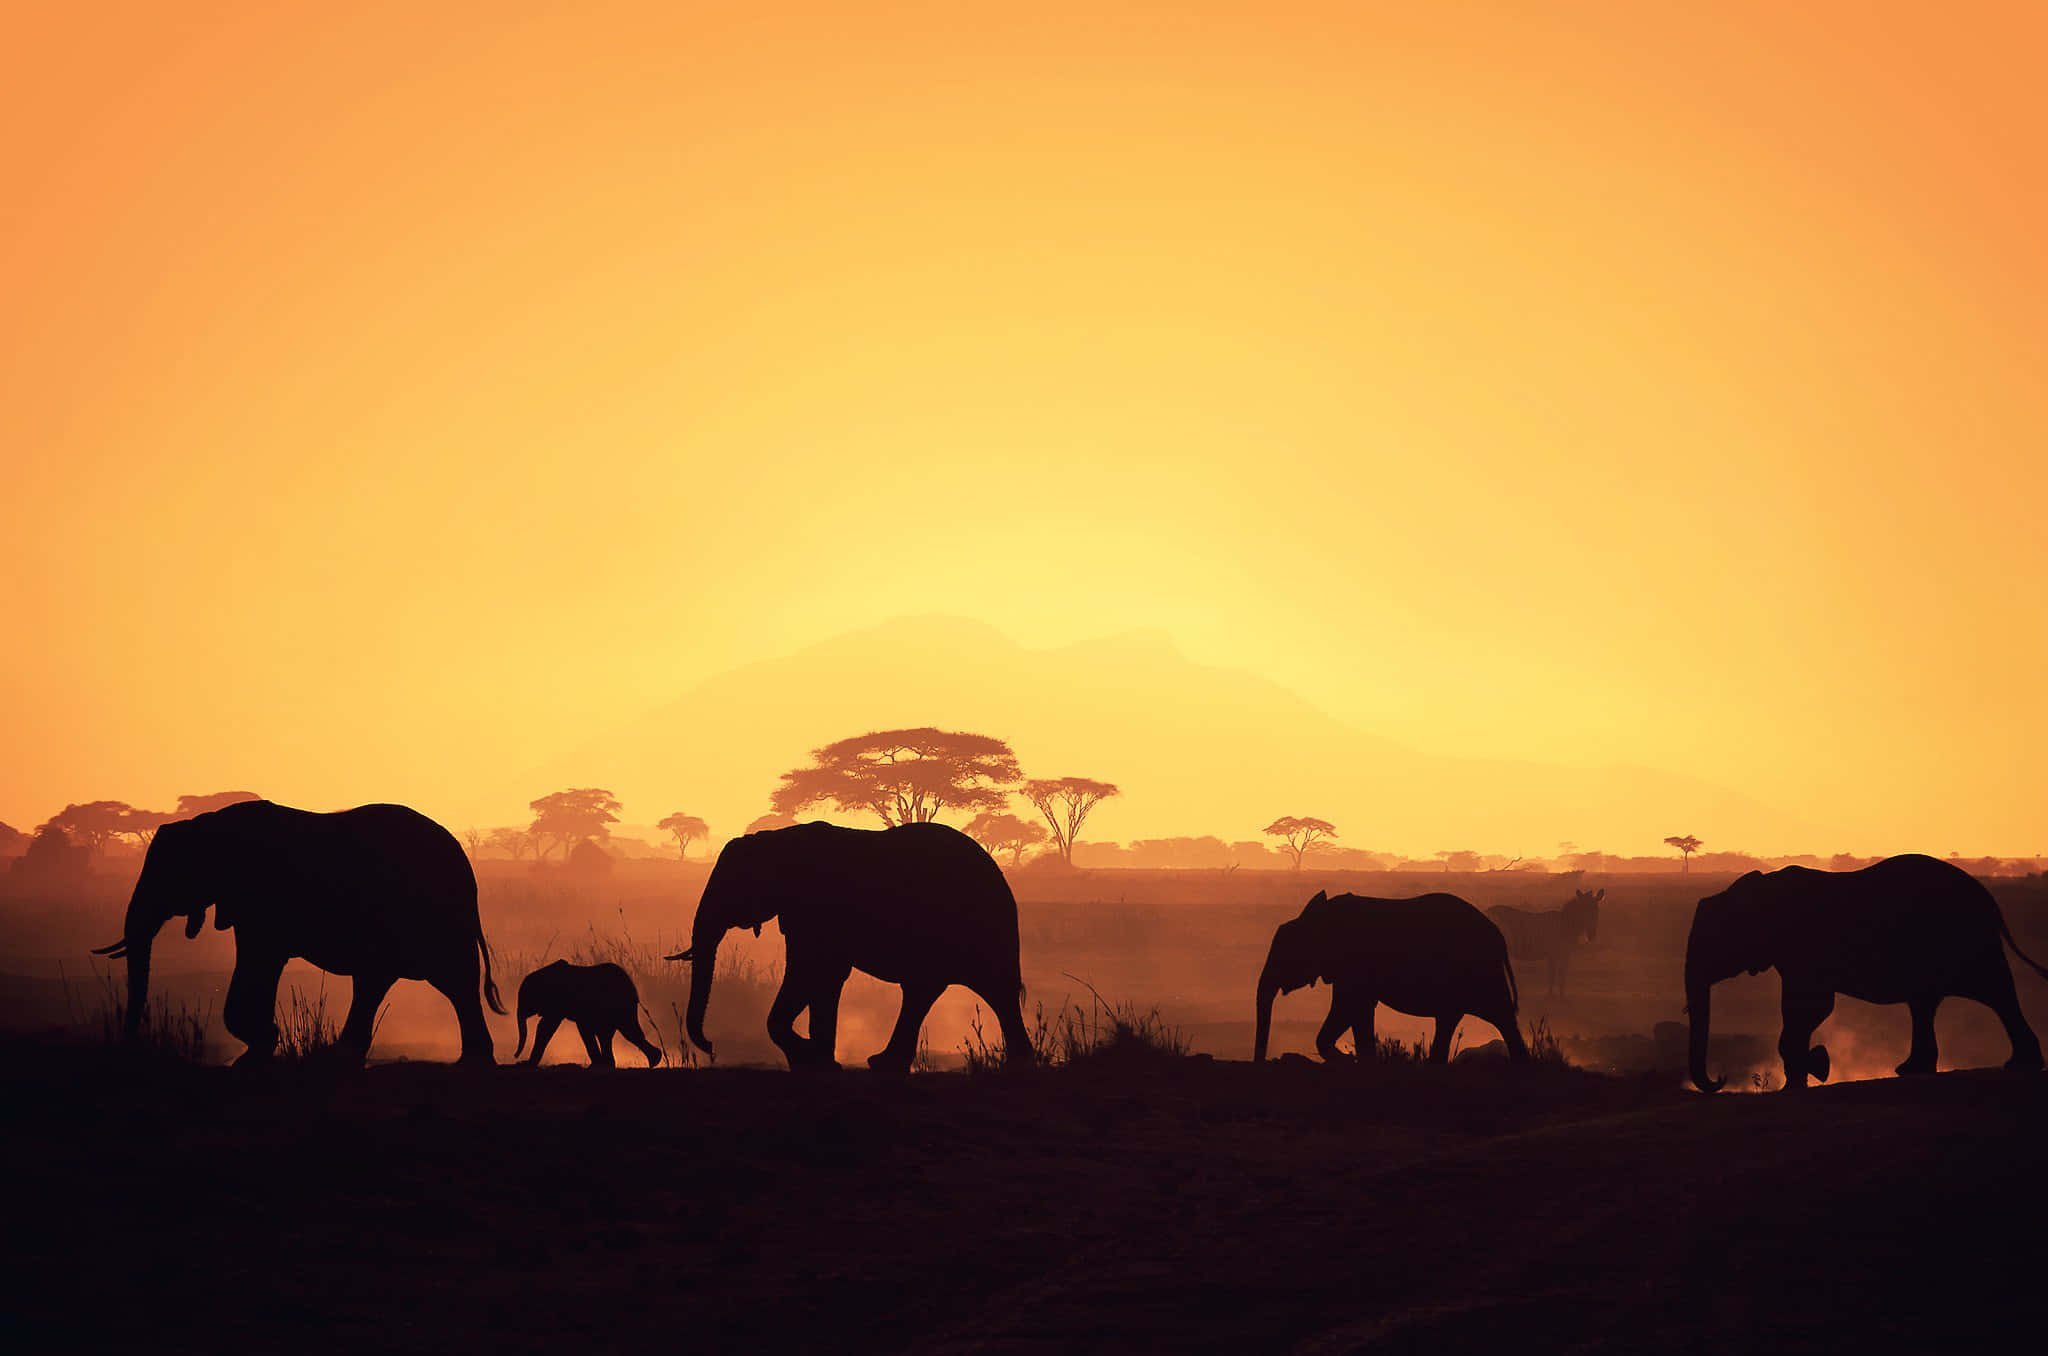 The Majesty Of African Wildlife" Wallpaper